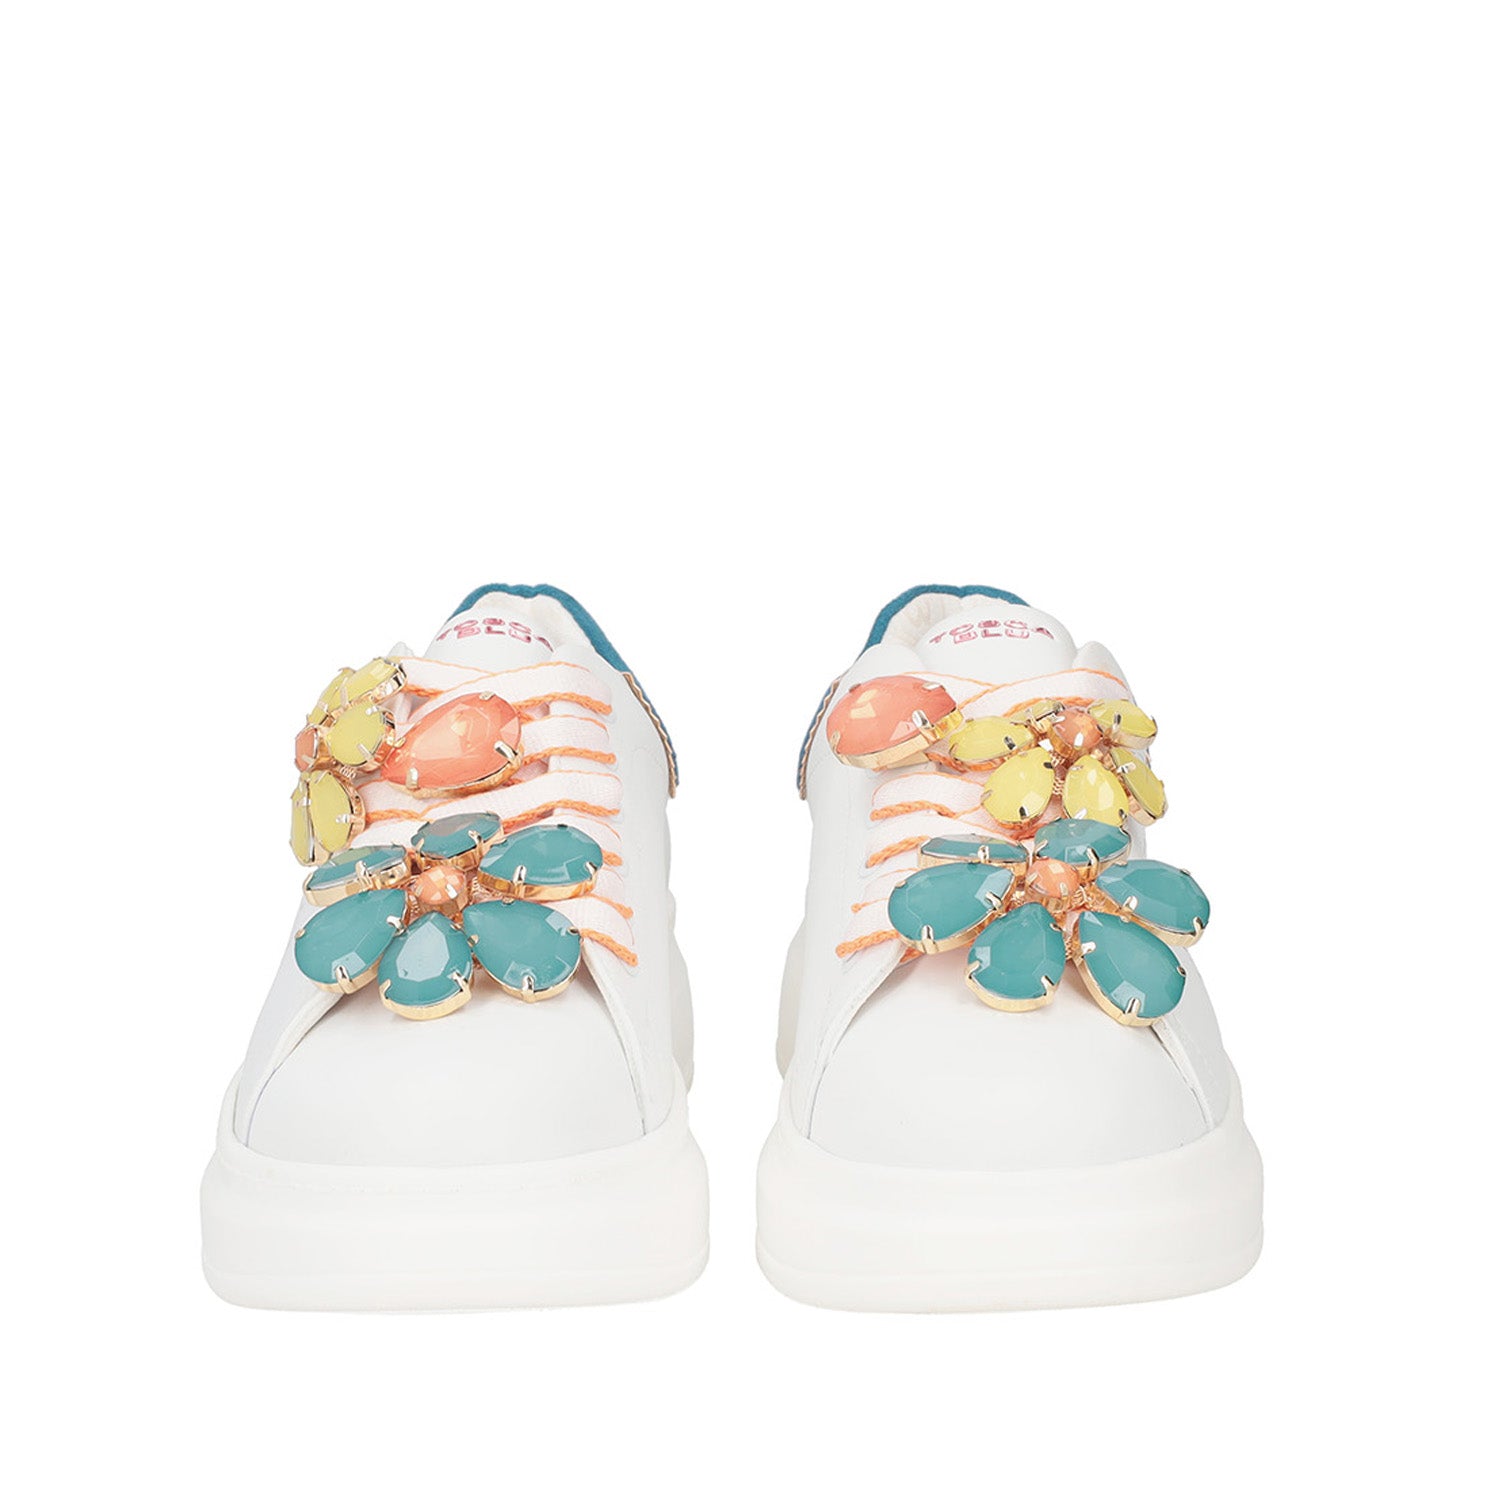 WHITE/TURQUOISE GLAMOUR SNEAKER IN LEATHER WITH JEWEL FLOWERS